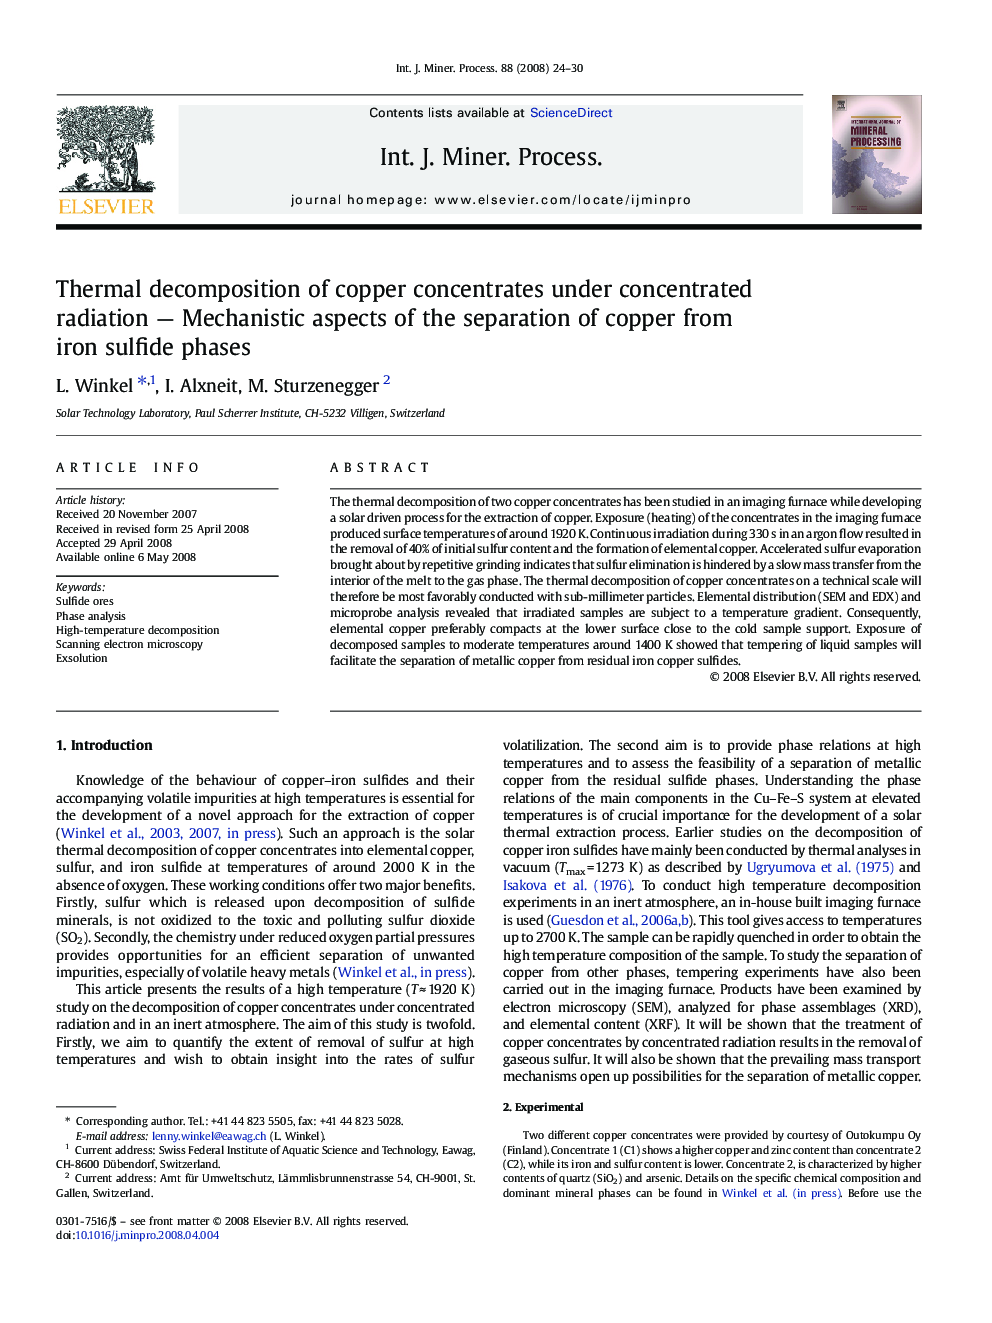 Thermal decomposition of copper concentrates under concentrated radiation — Mechanistic aspects of the separation of copper from iron sulfide phases